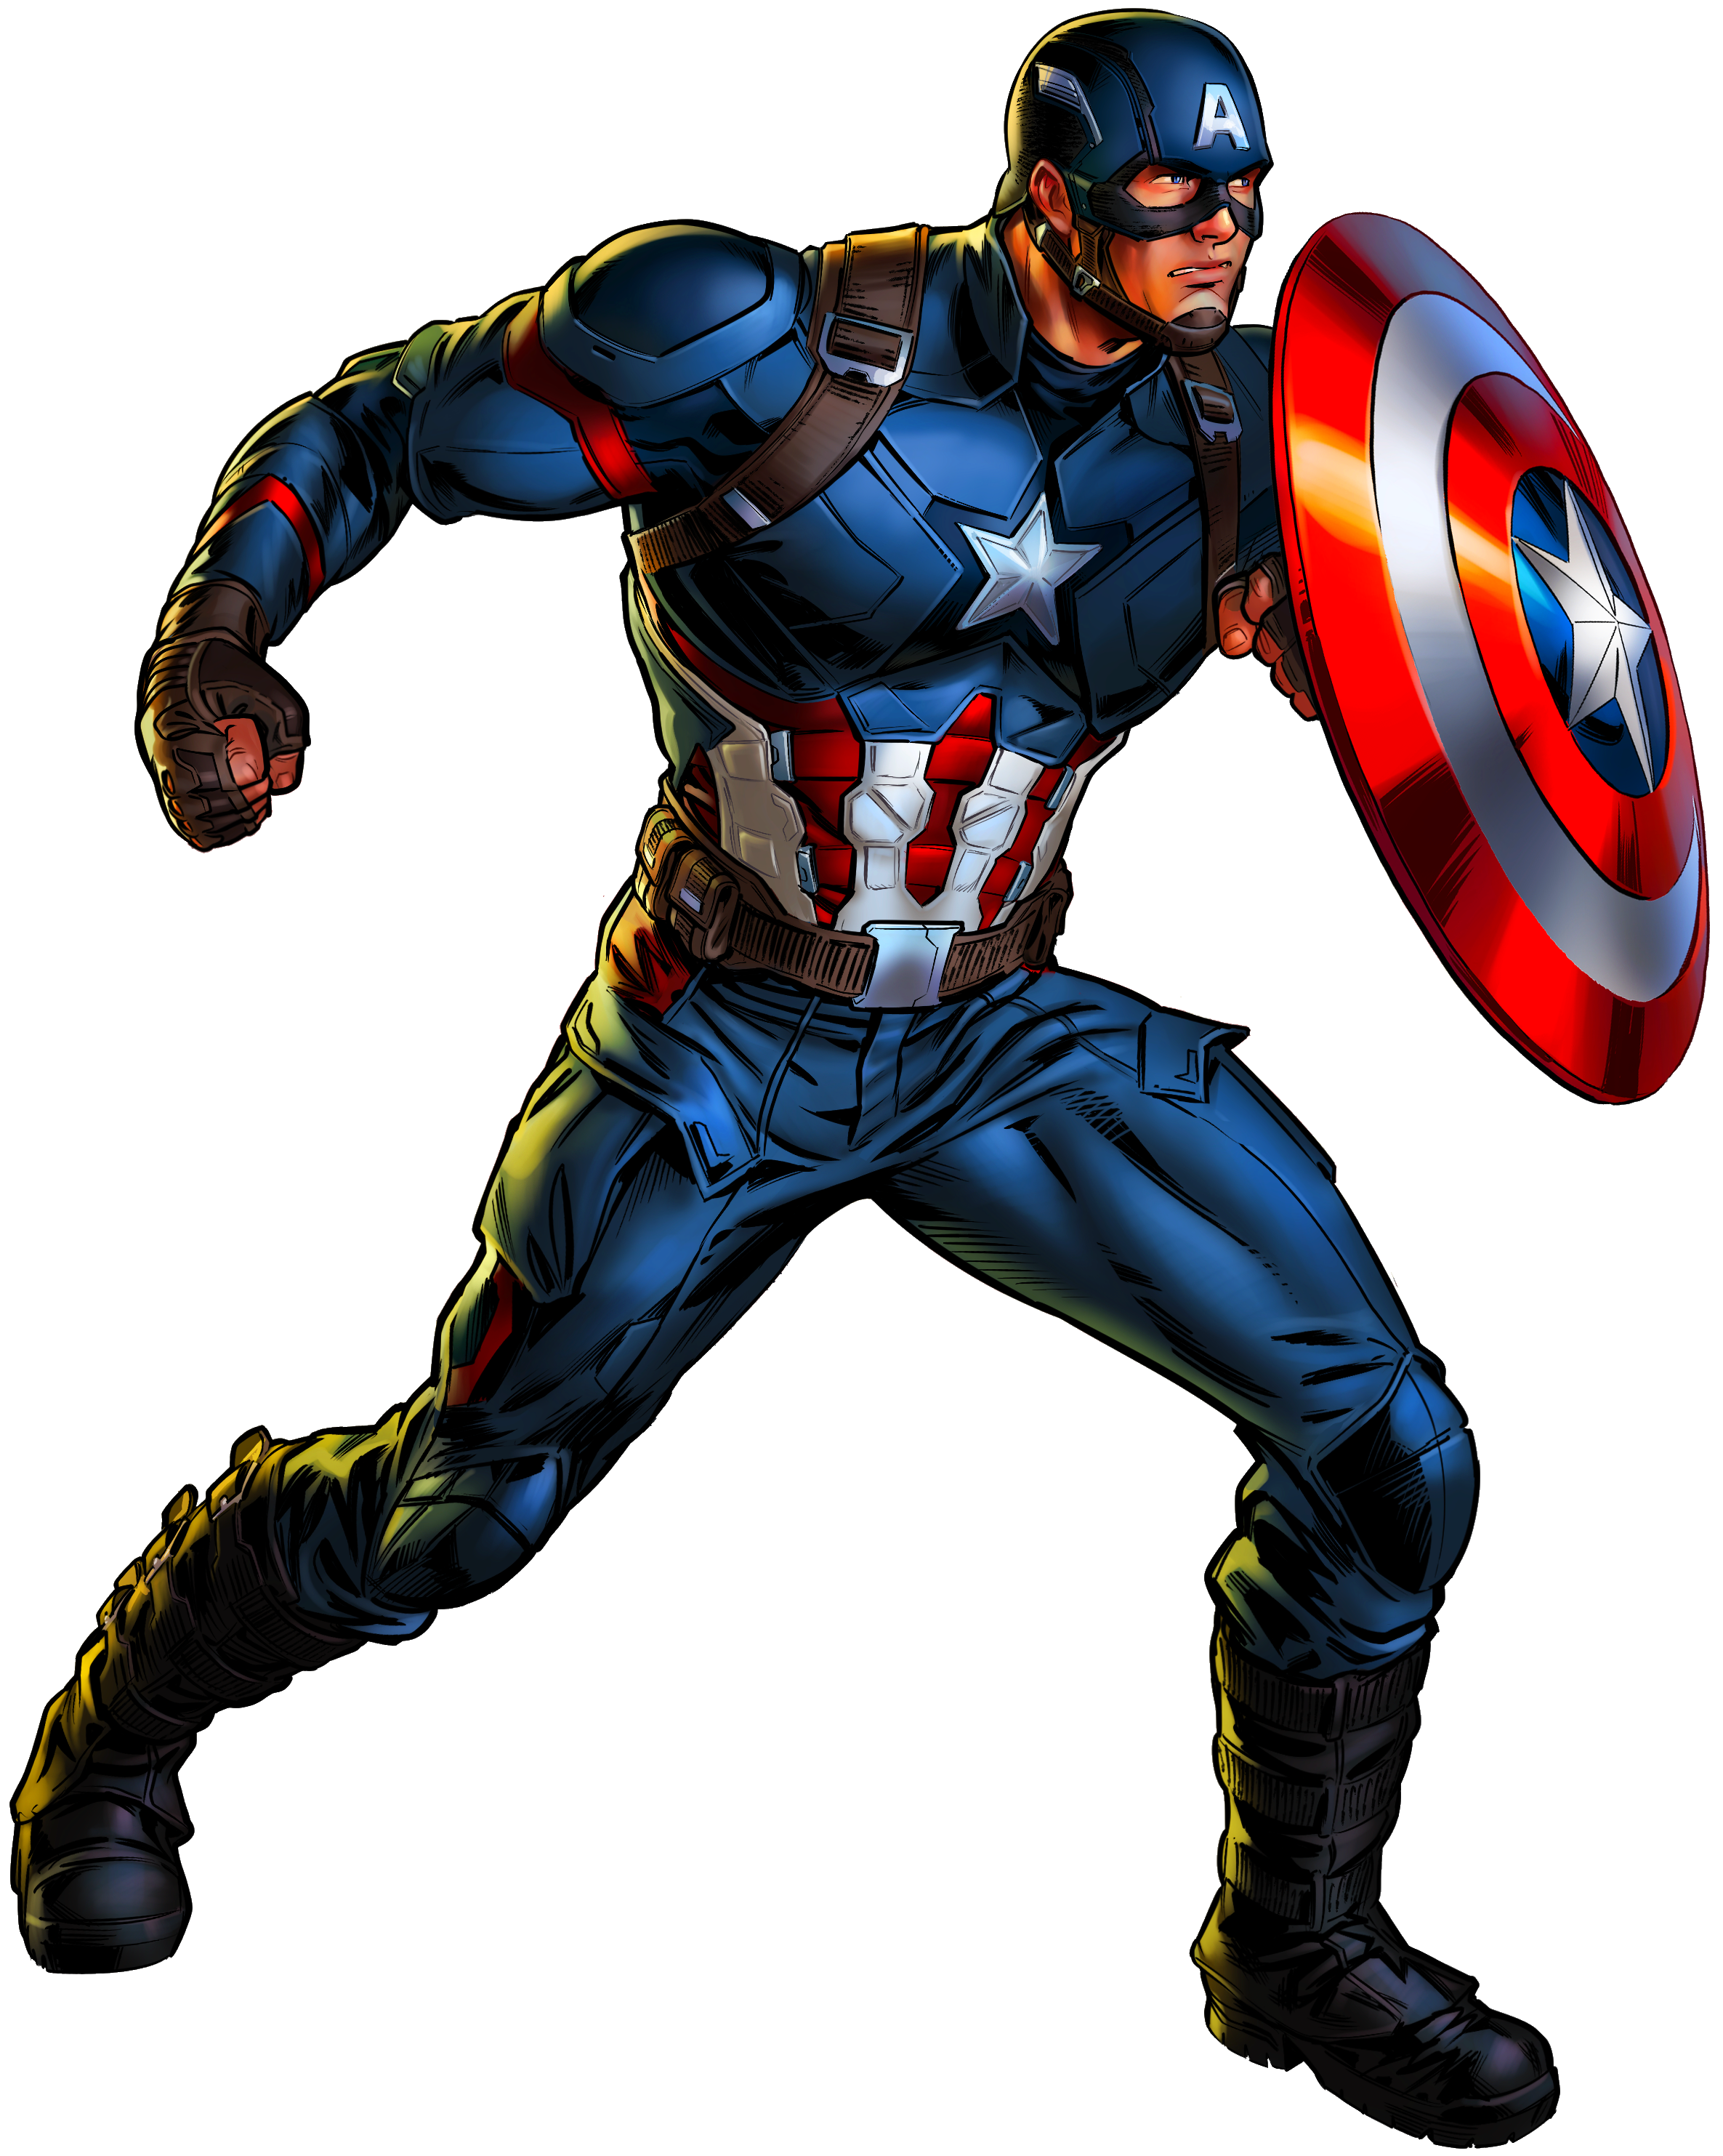 Captain America Comic Png | www.imgkid.com - The Image Kid ...